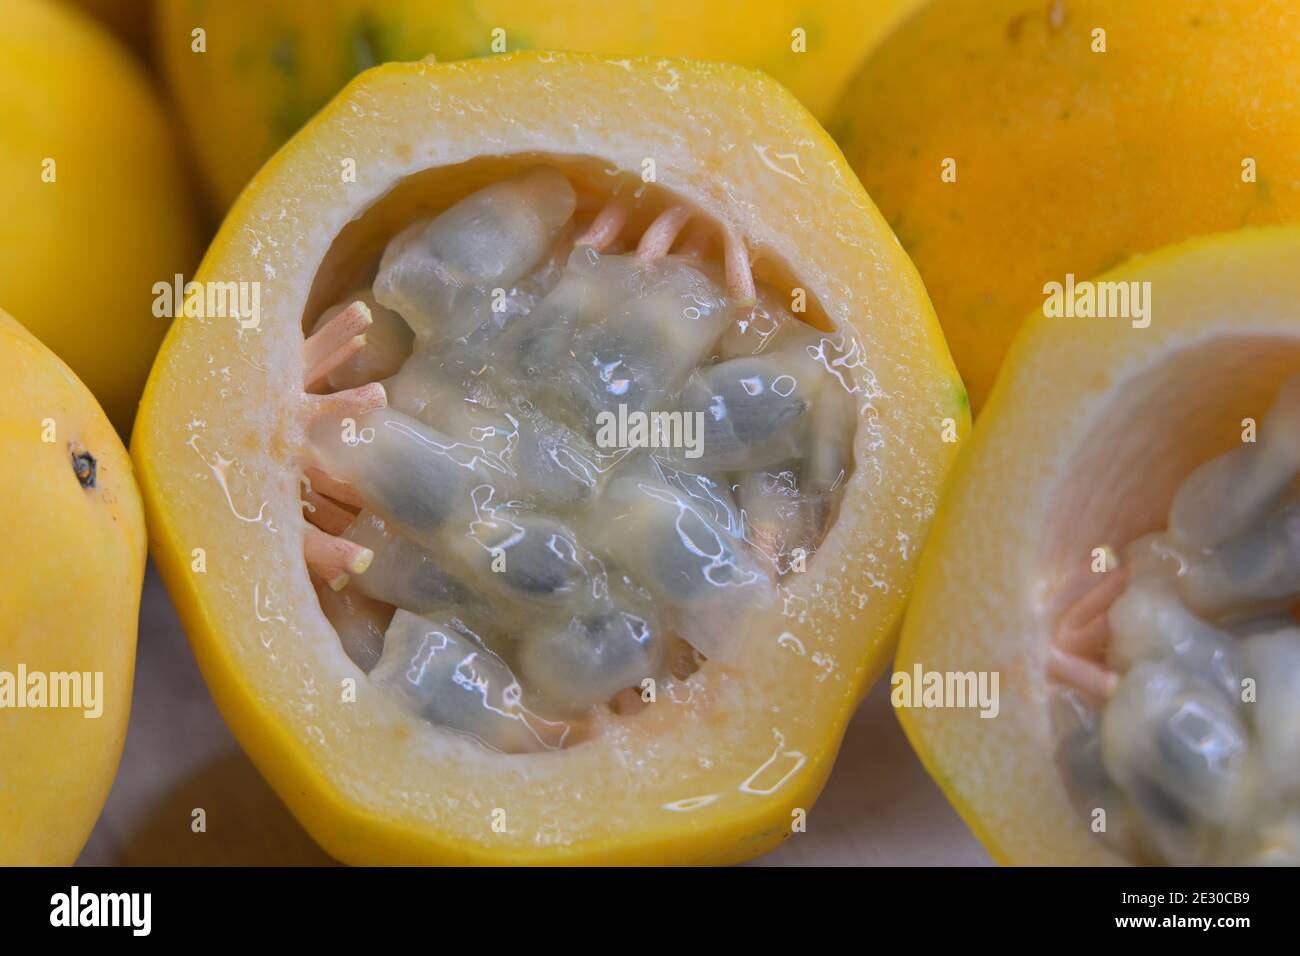 Close-up of cut yellow golden passion fruit, Passiflora edulis, with its distinctive rind and numerous tiny, dark brown or black, pitted seeds Stock Photo